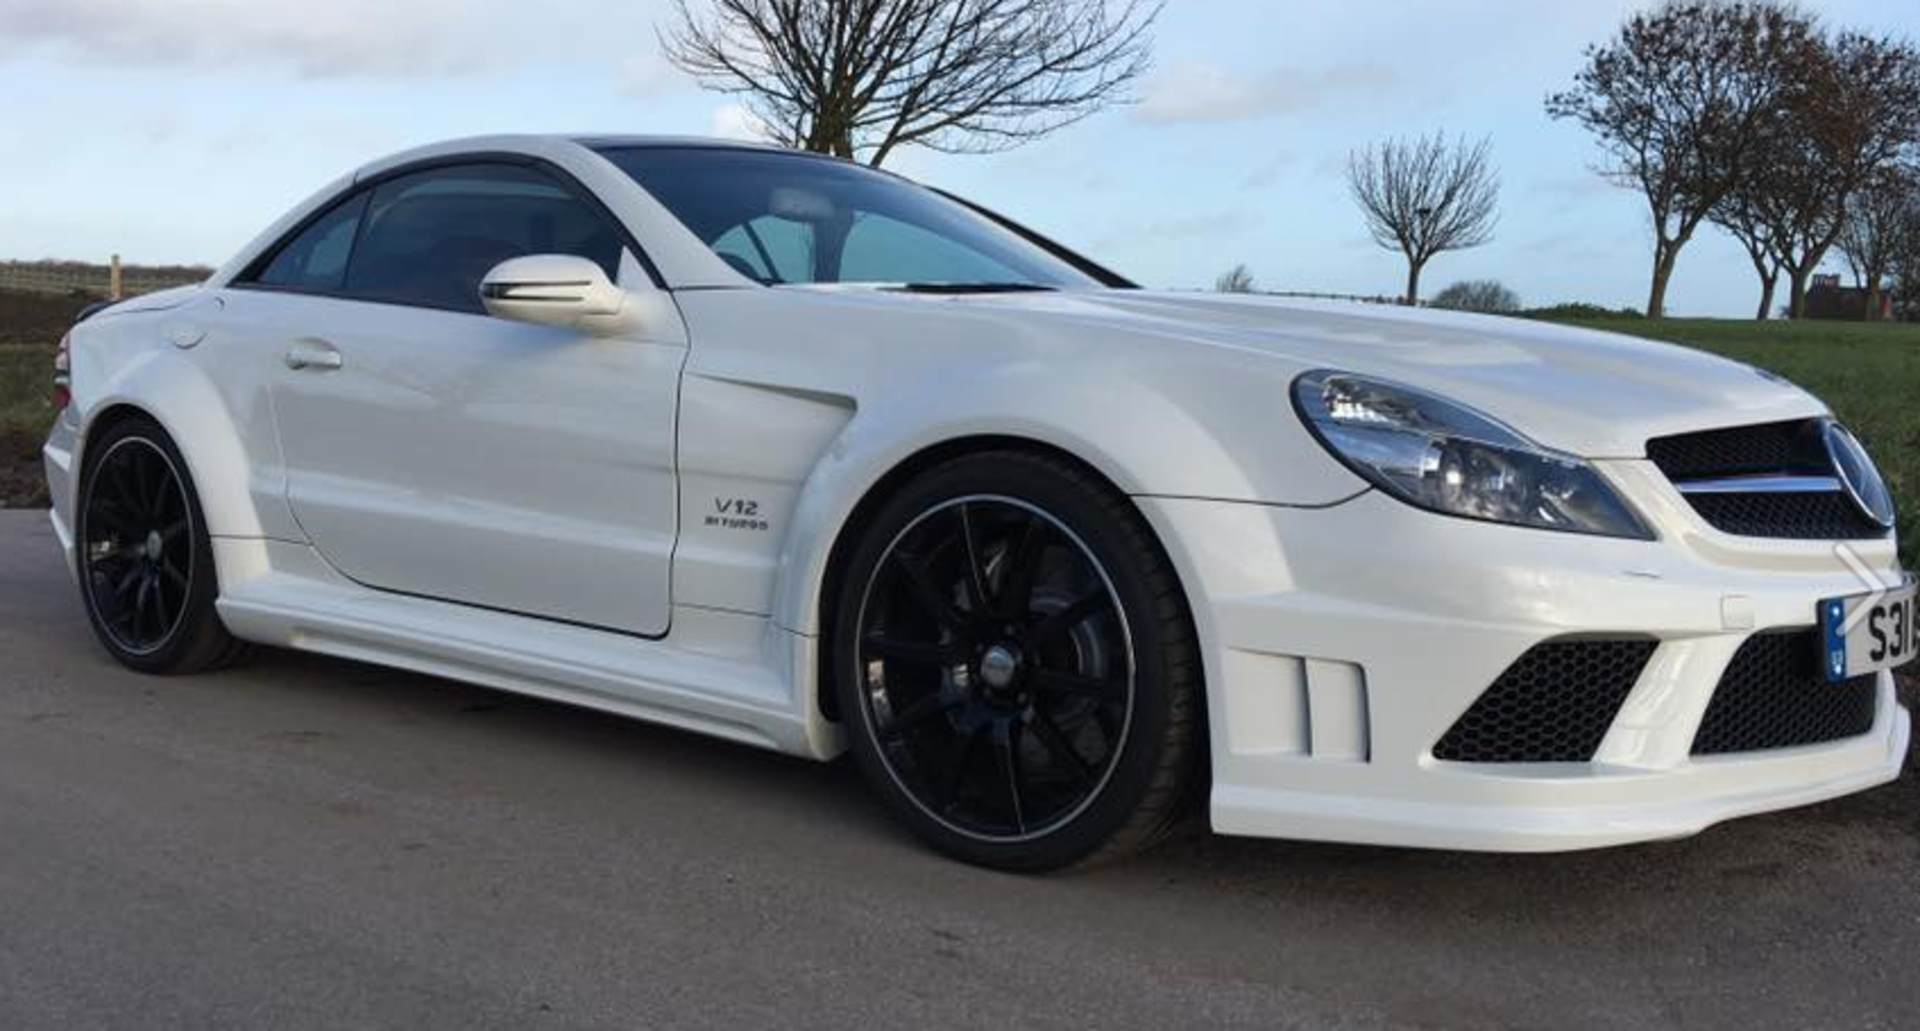 2002 Mercedes SL55 AMG - Private Registration 'S31 BHP' Included ***Reserve Lowered***